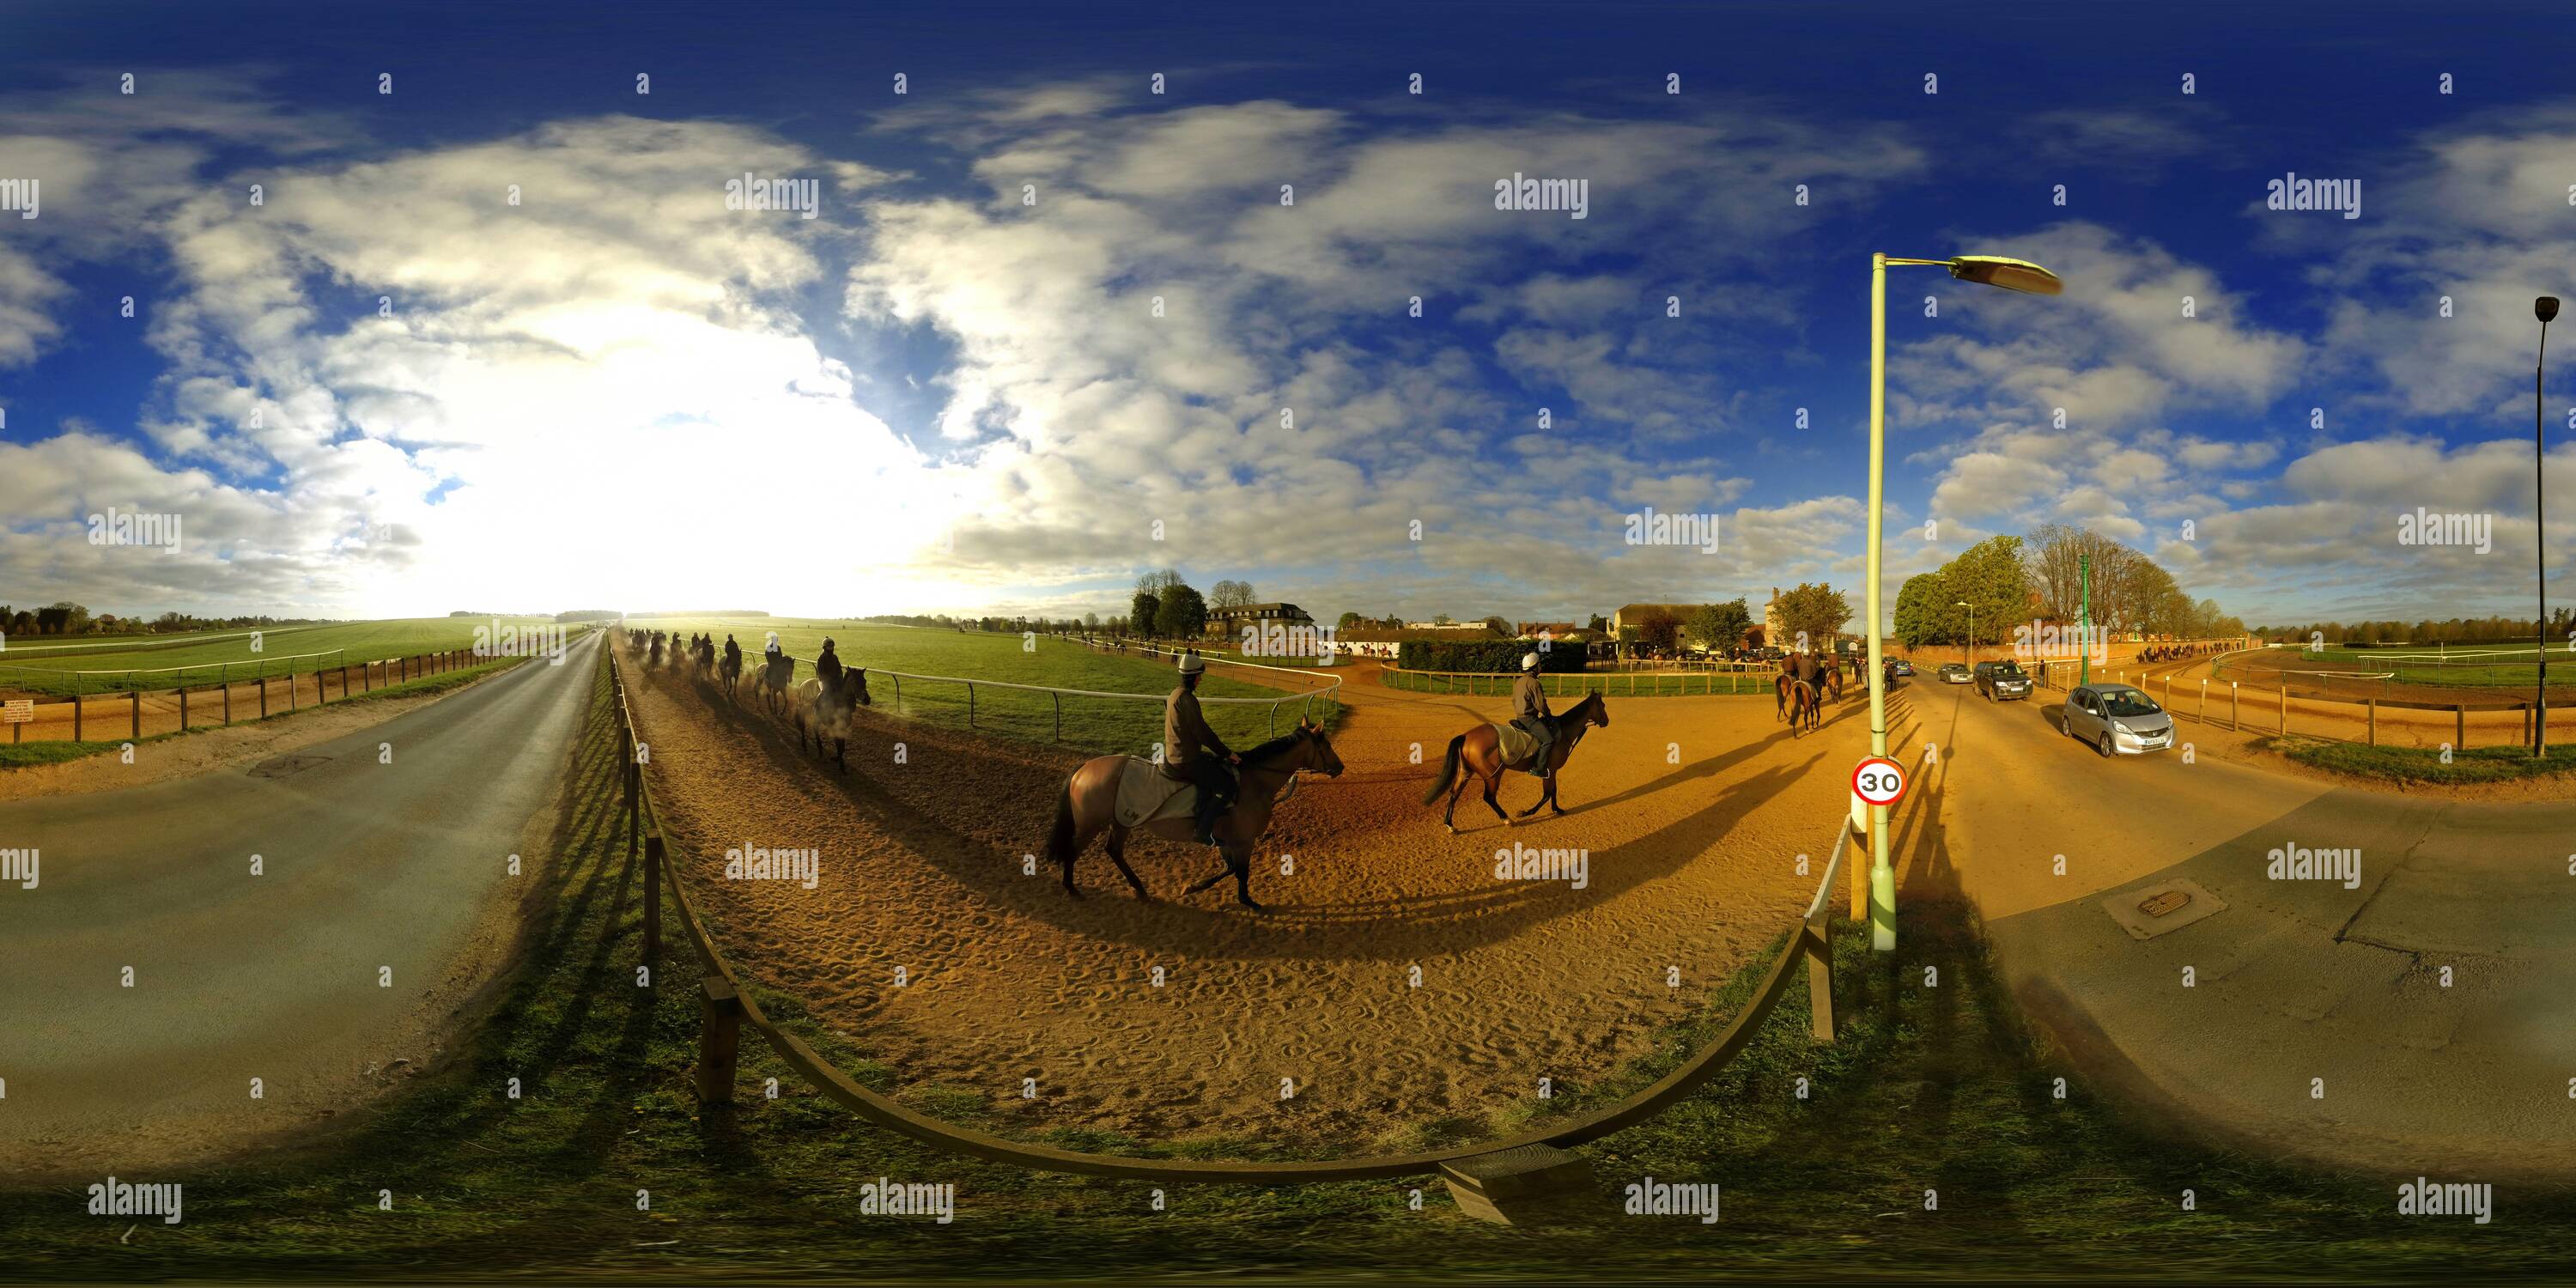 360 degree panoramic view of THOROUGHBRED RACEHORSES OF ARRIVE AT THE BOTTOM OF THE GALLOPS AT WARREN HILL, THE MAIN GALLOPS IN NEWMARKET, SUFFOLK. PICTURE :  MARK PAIN / ALAMY